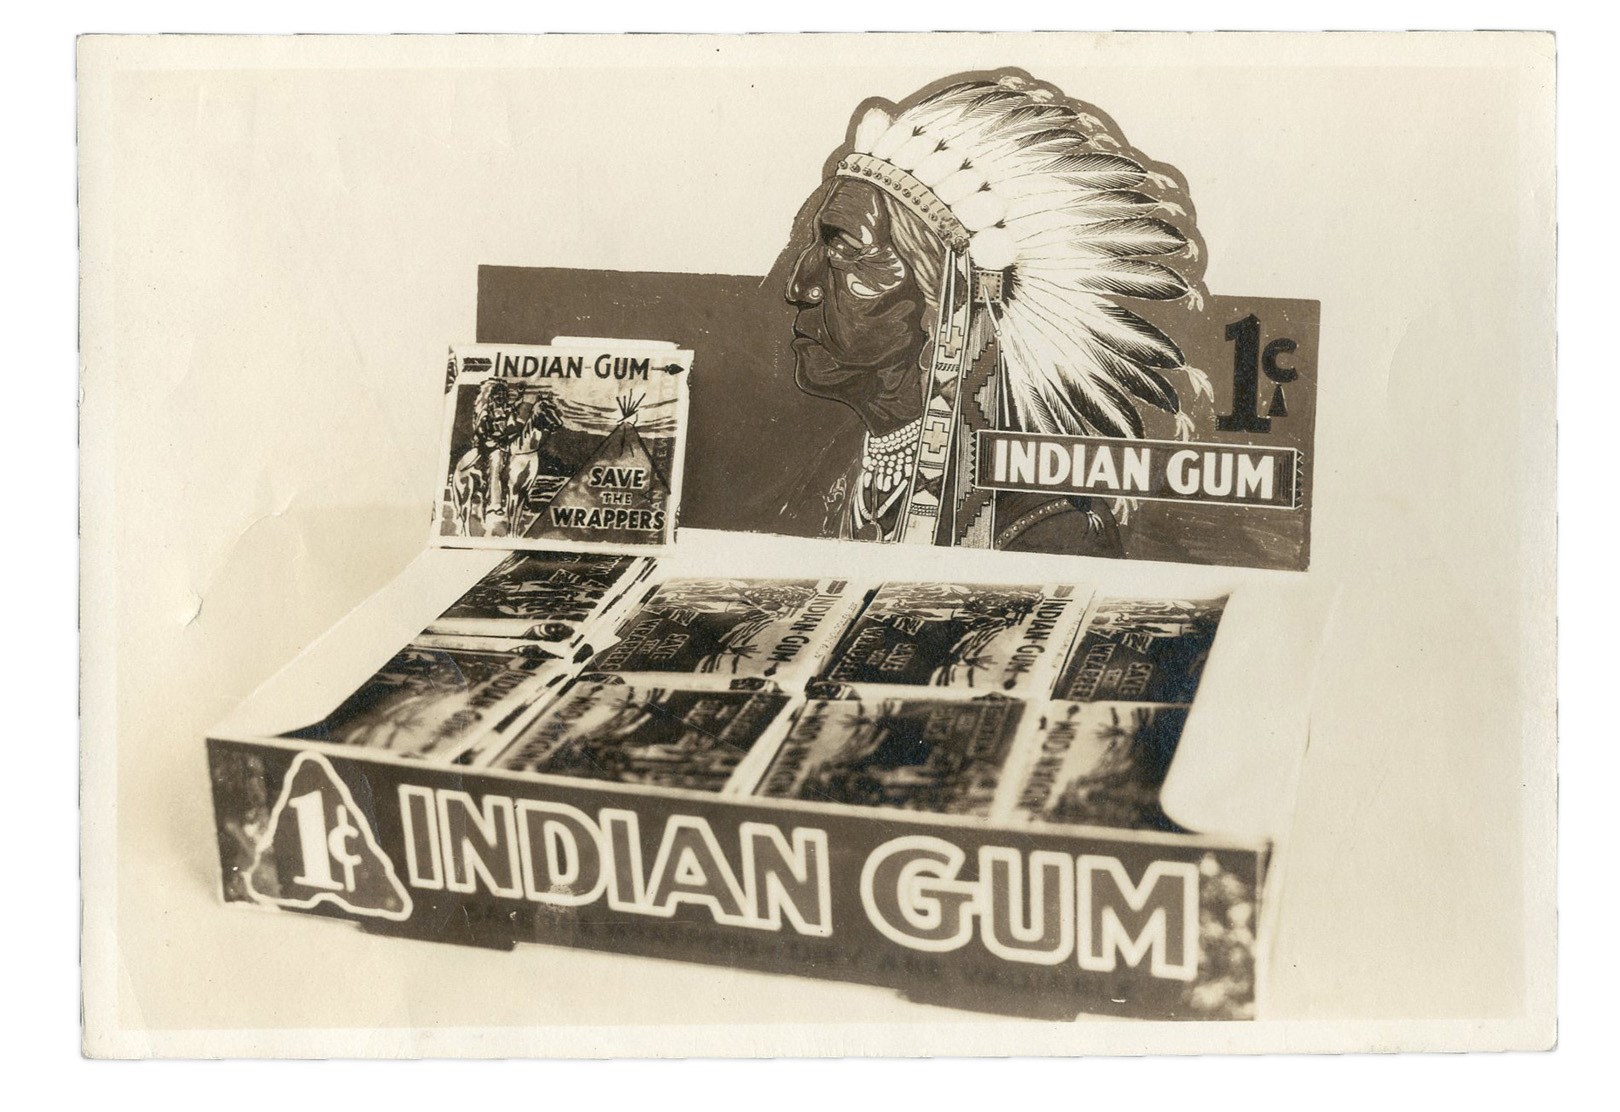 1930s Indian Gum Original Picture of Wax Box - from the Goudey Files!